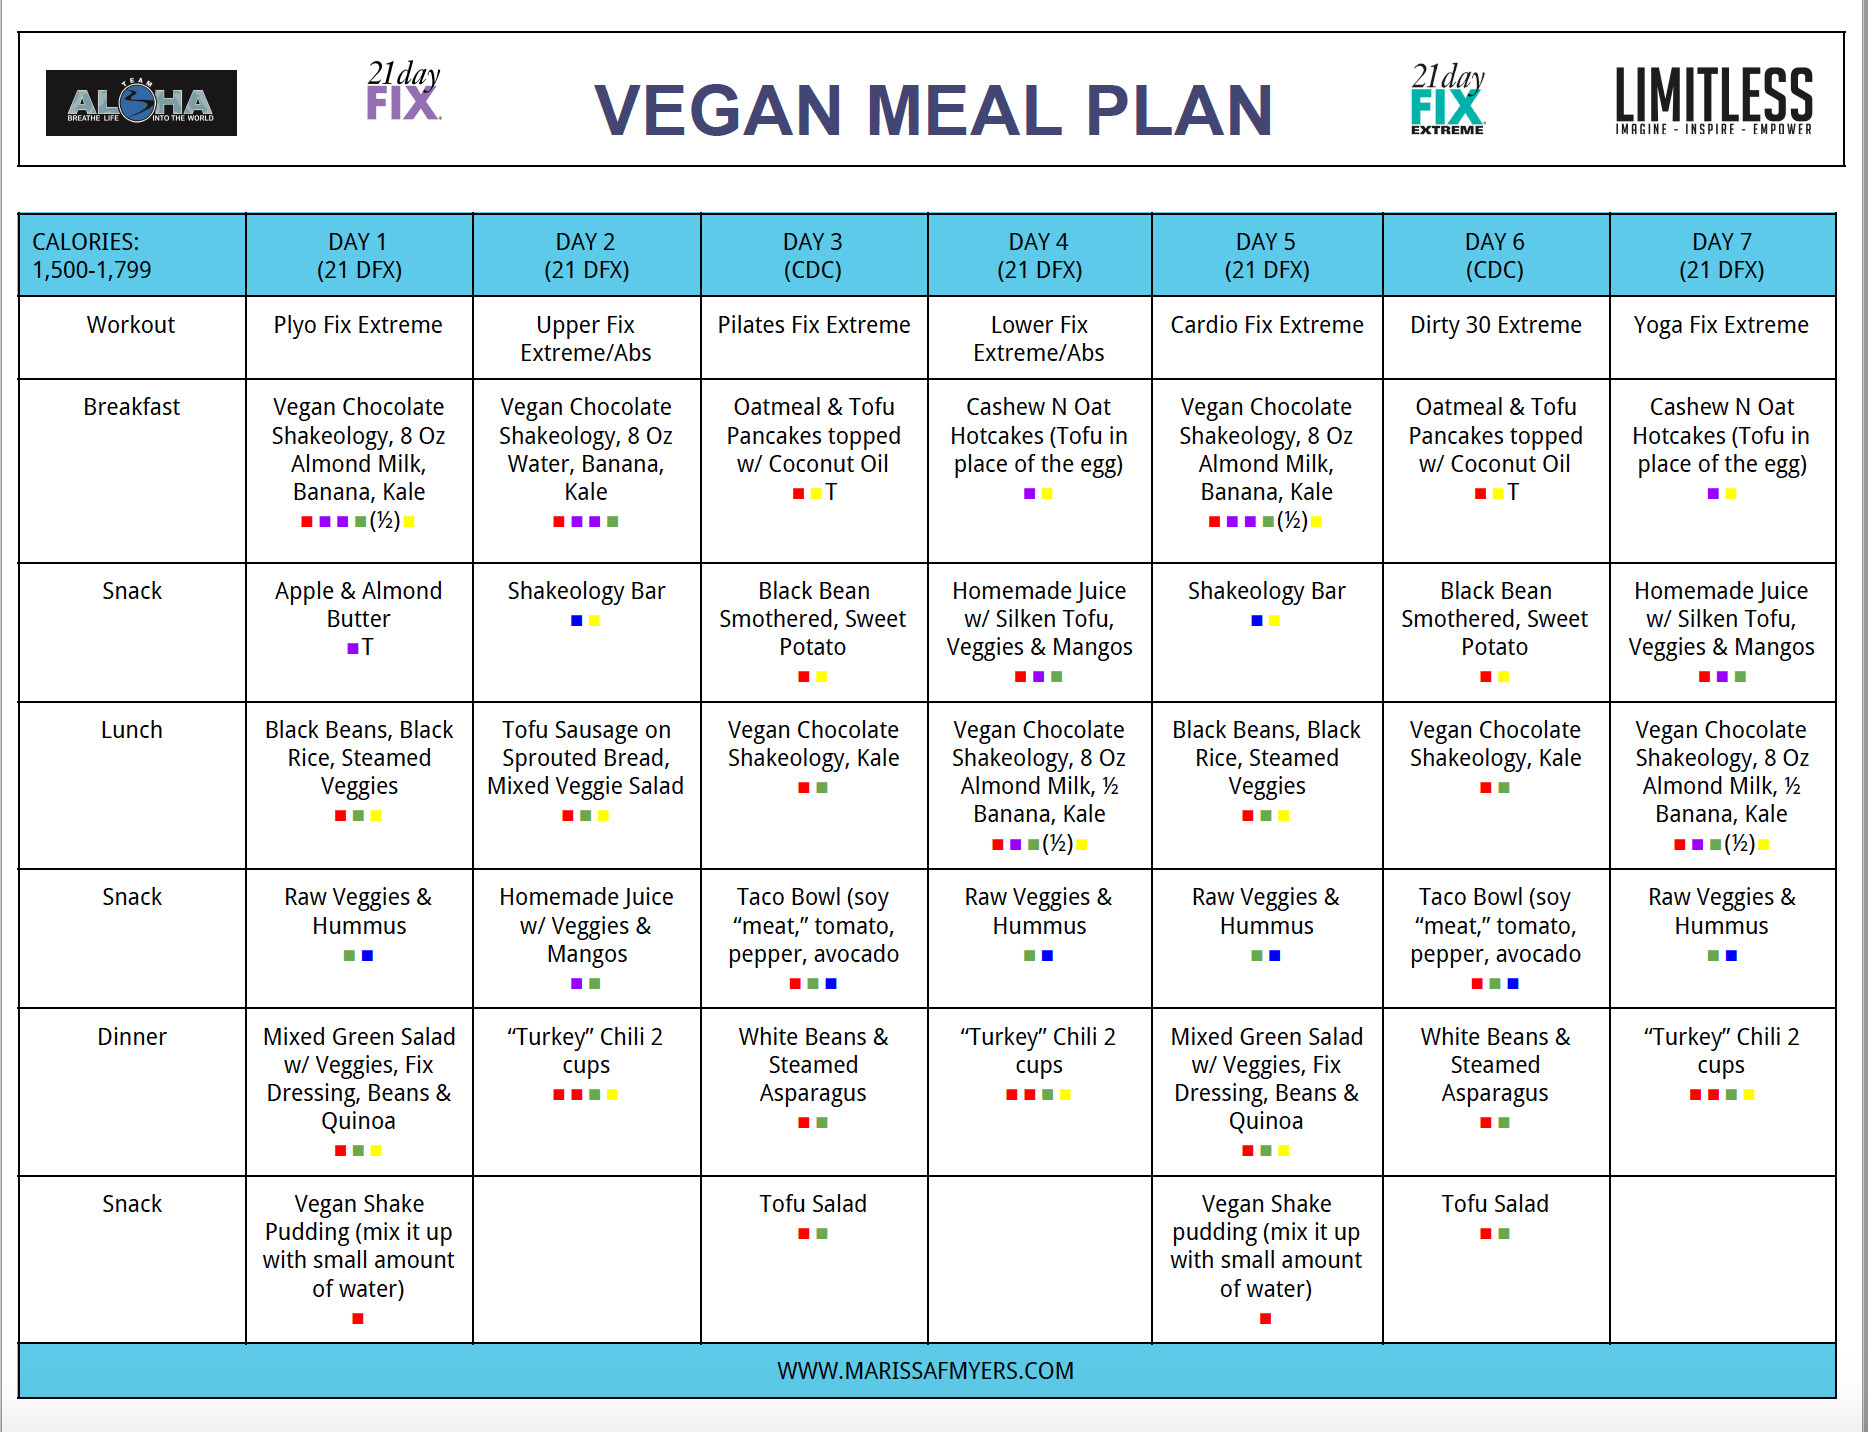 Vegan Diet Plan Weightloss 21 Days
 Get Prepped For The 21 Day Fix or 21 Day Fix EXTREME